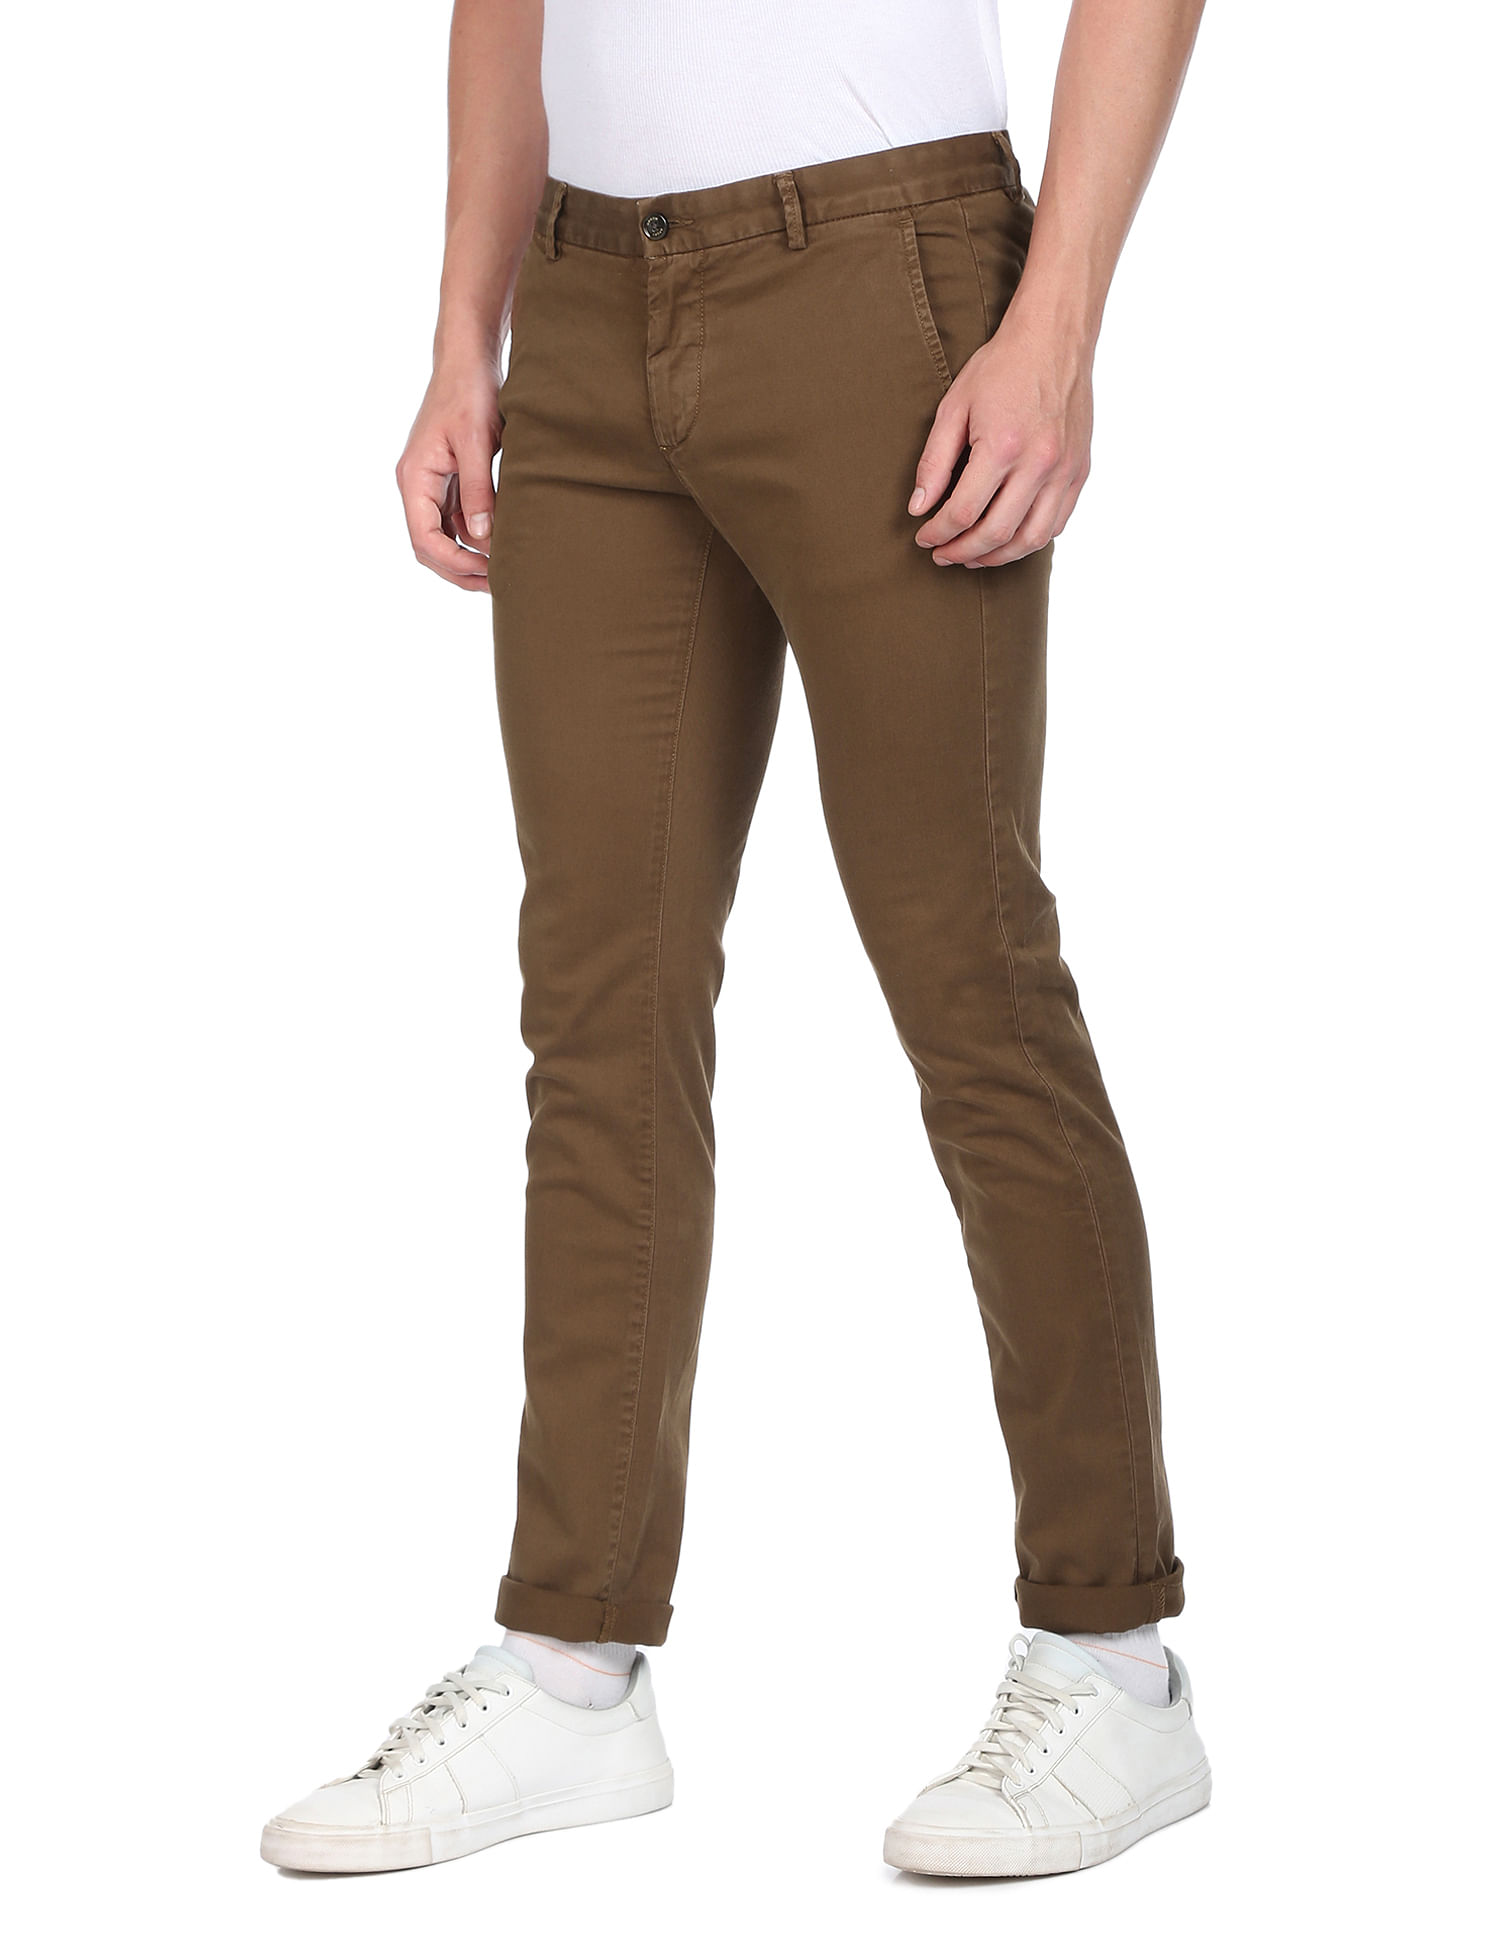 What To Wear With Brown Pants For Men Outfit Ideas and Styling Tips 2023